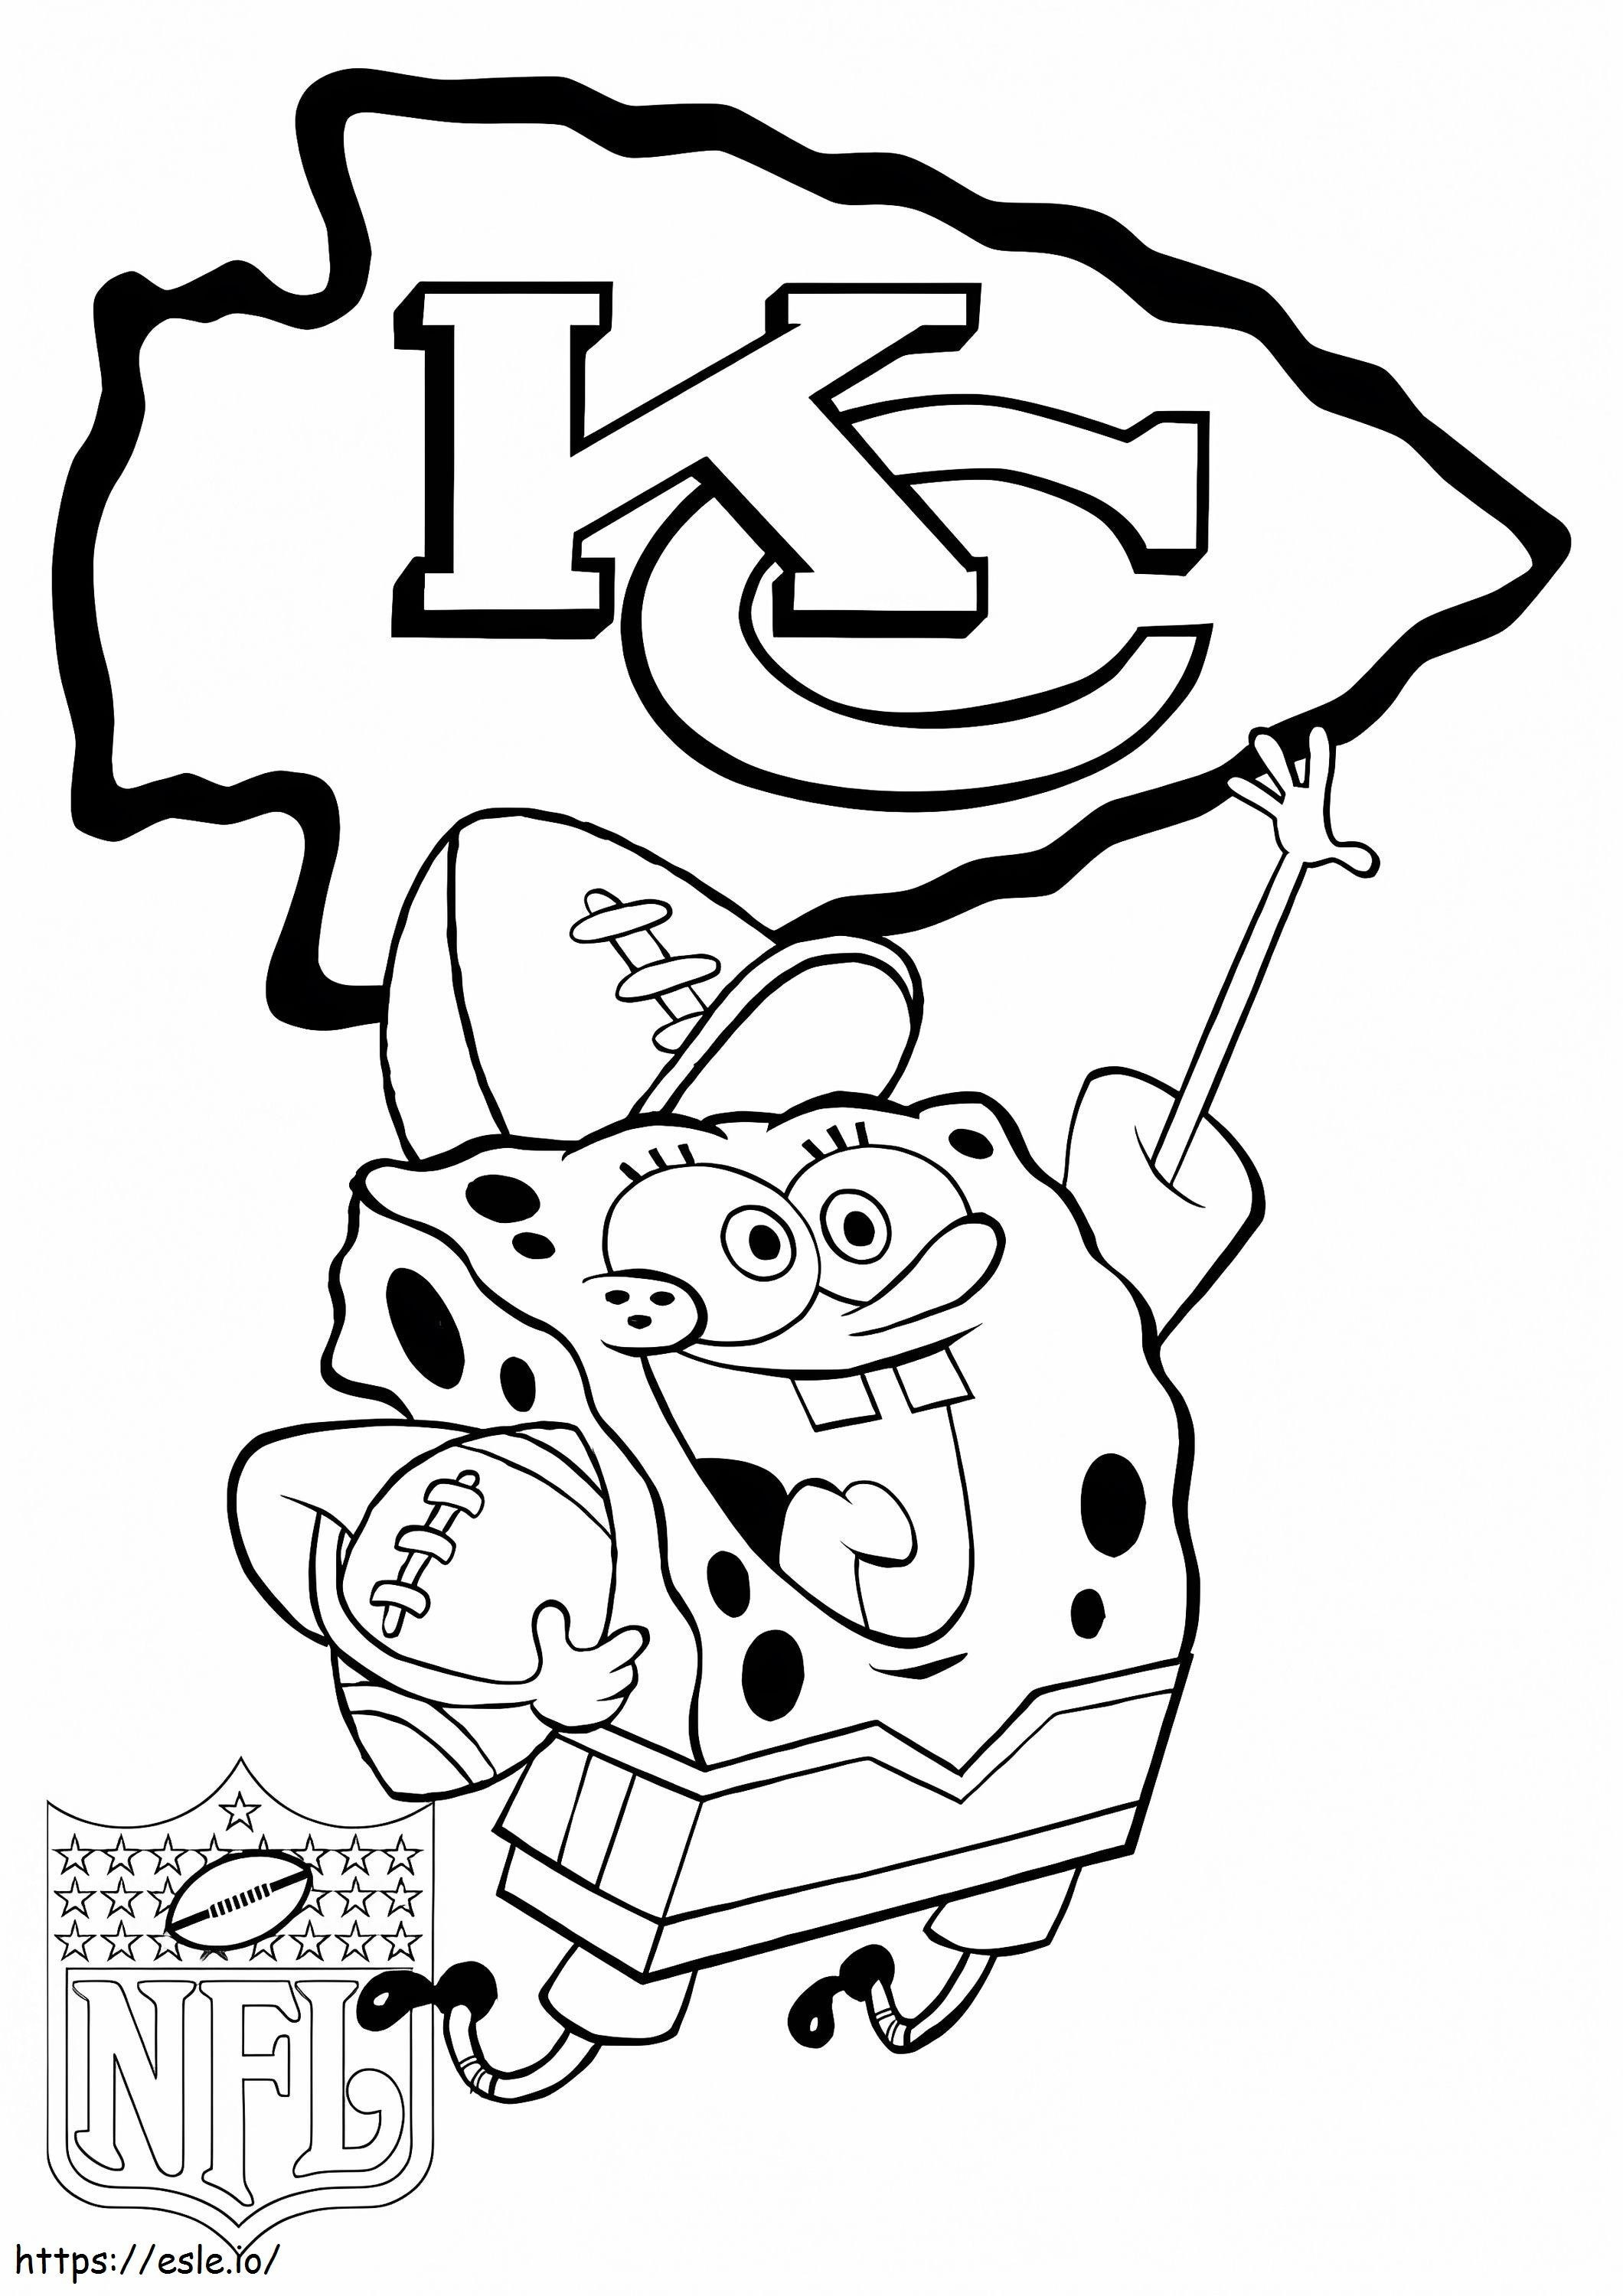 Kansas City Chiefs With Spongebob coloring page